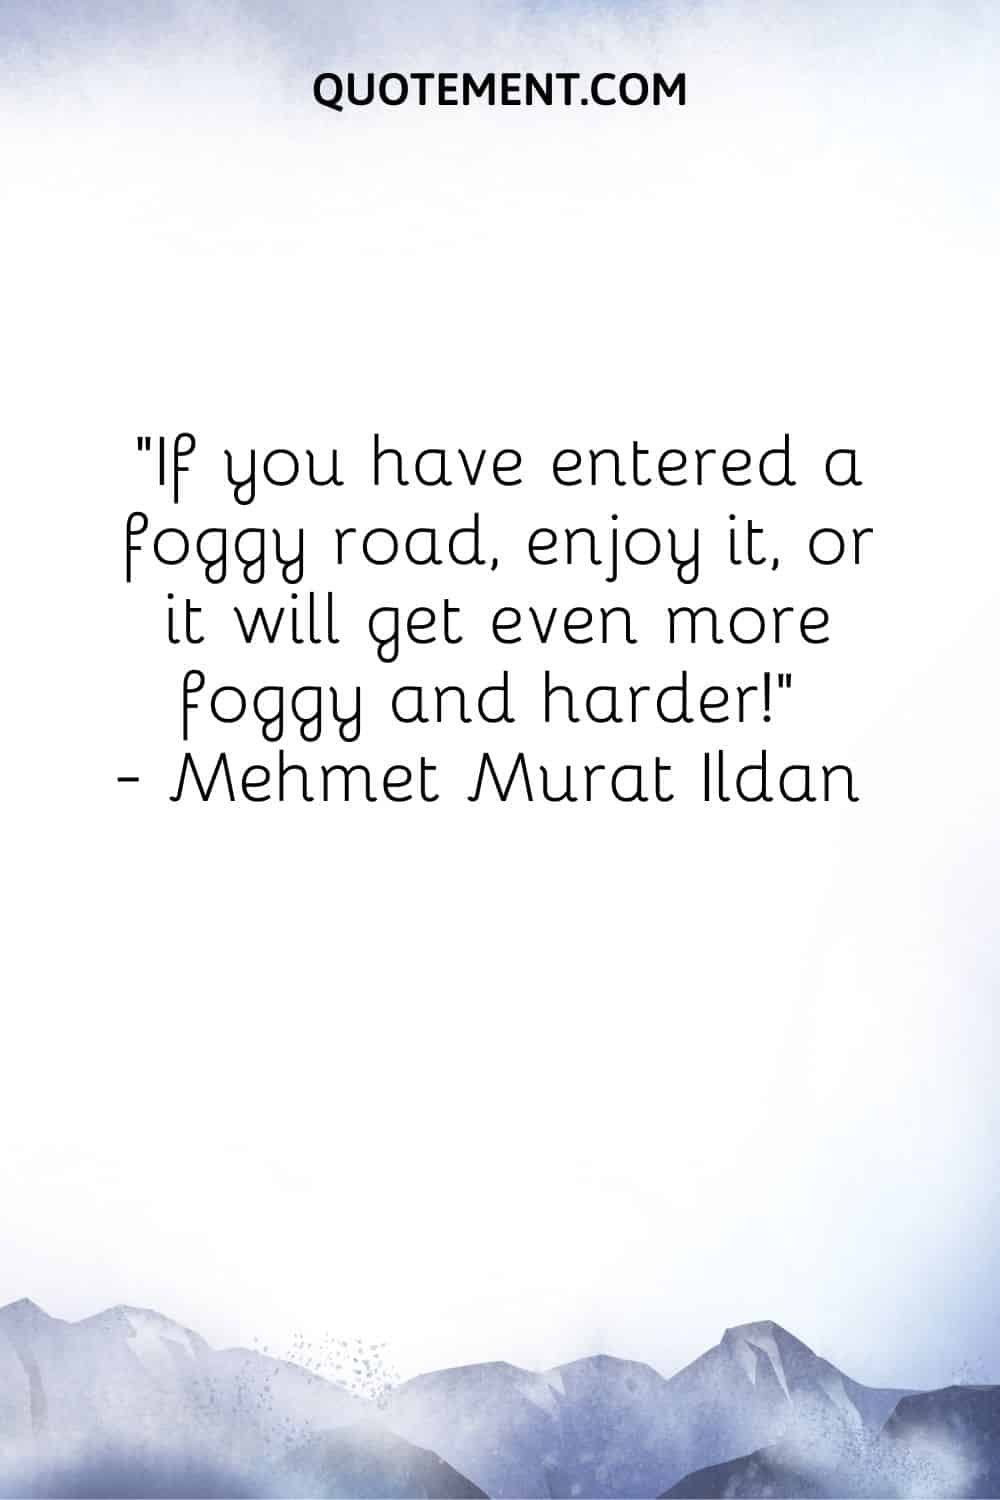 If you have entered a foggy road, enjoy it, or it will get even more foggy and harder